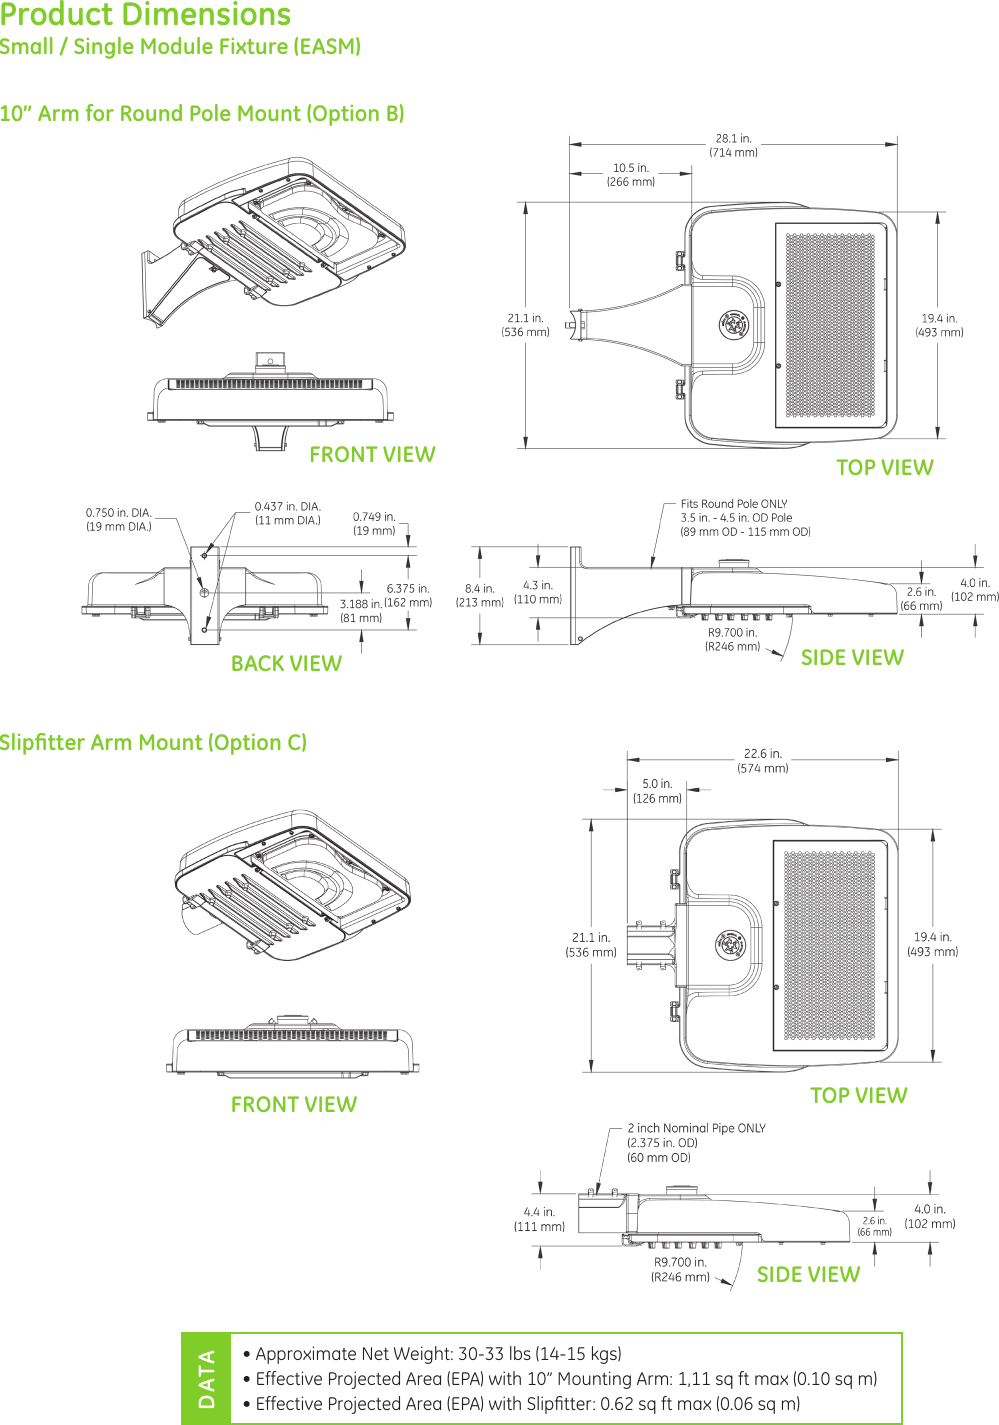 Page 6 of 8 - Ge-Appliances Ge-Easm-And-Eamm-Data-Sheet- GE Evolve Outdoor LED Lighting Fixtures Area Light Modular Small Medium EAMM EASM DataSheet |  Ge-easm-and-eamm-data-sheet